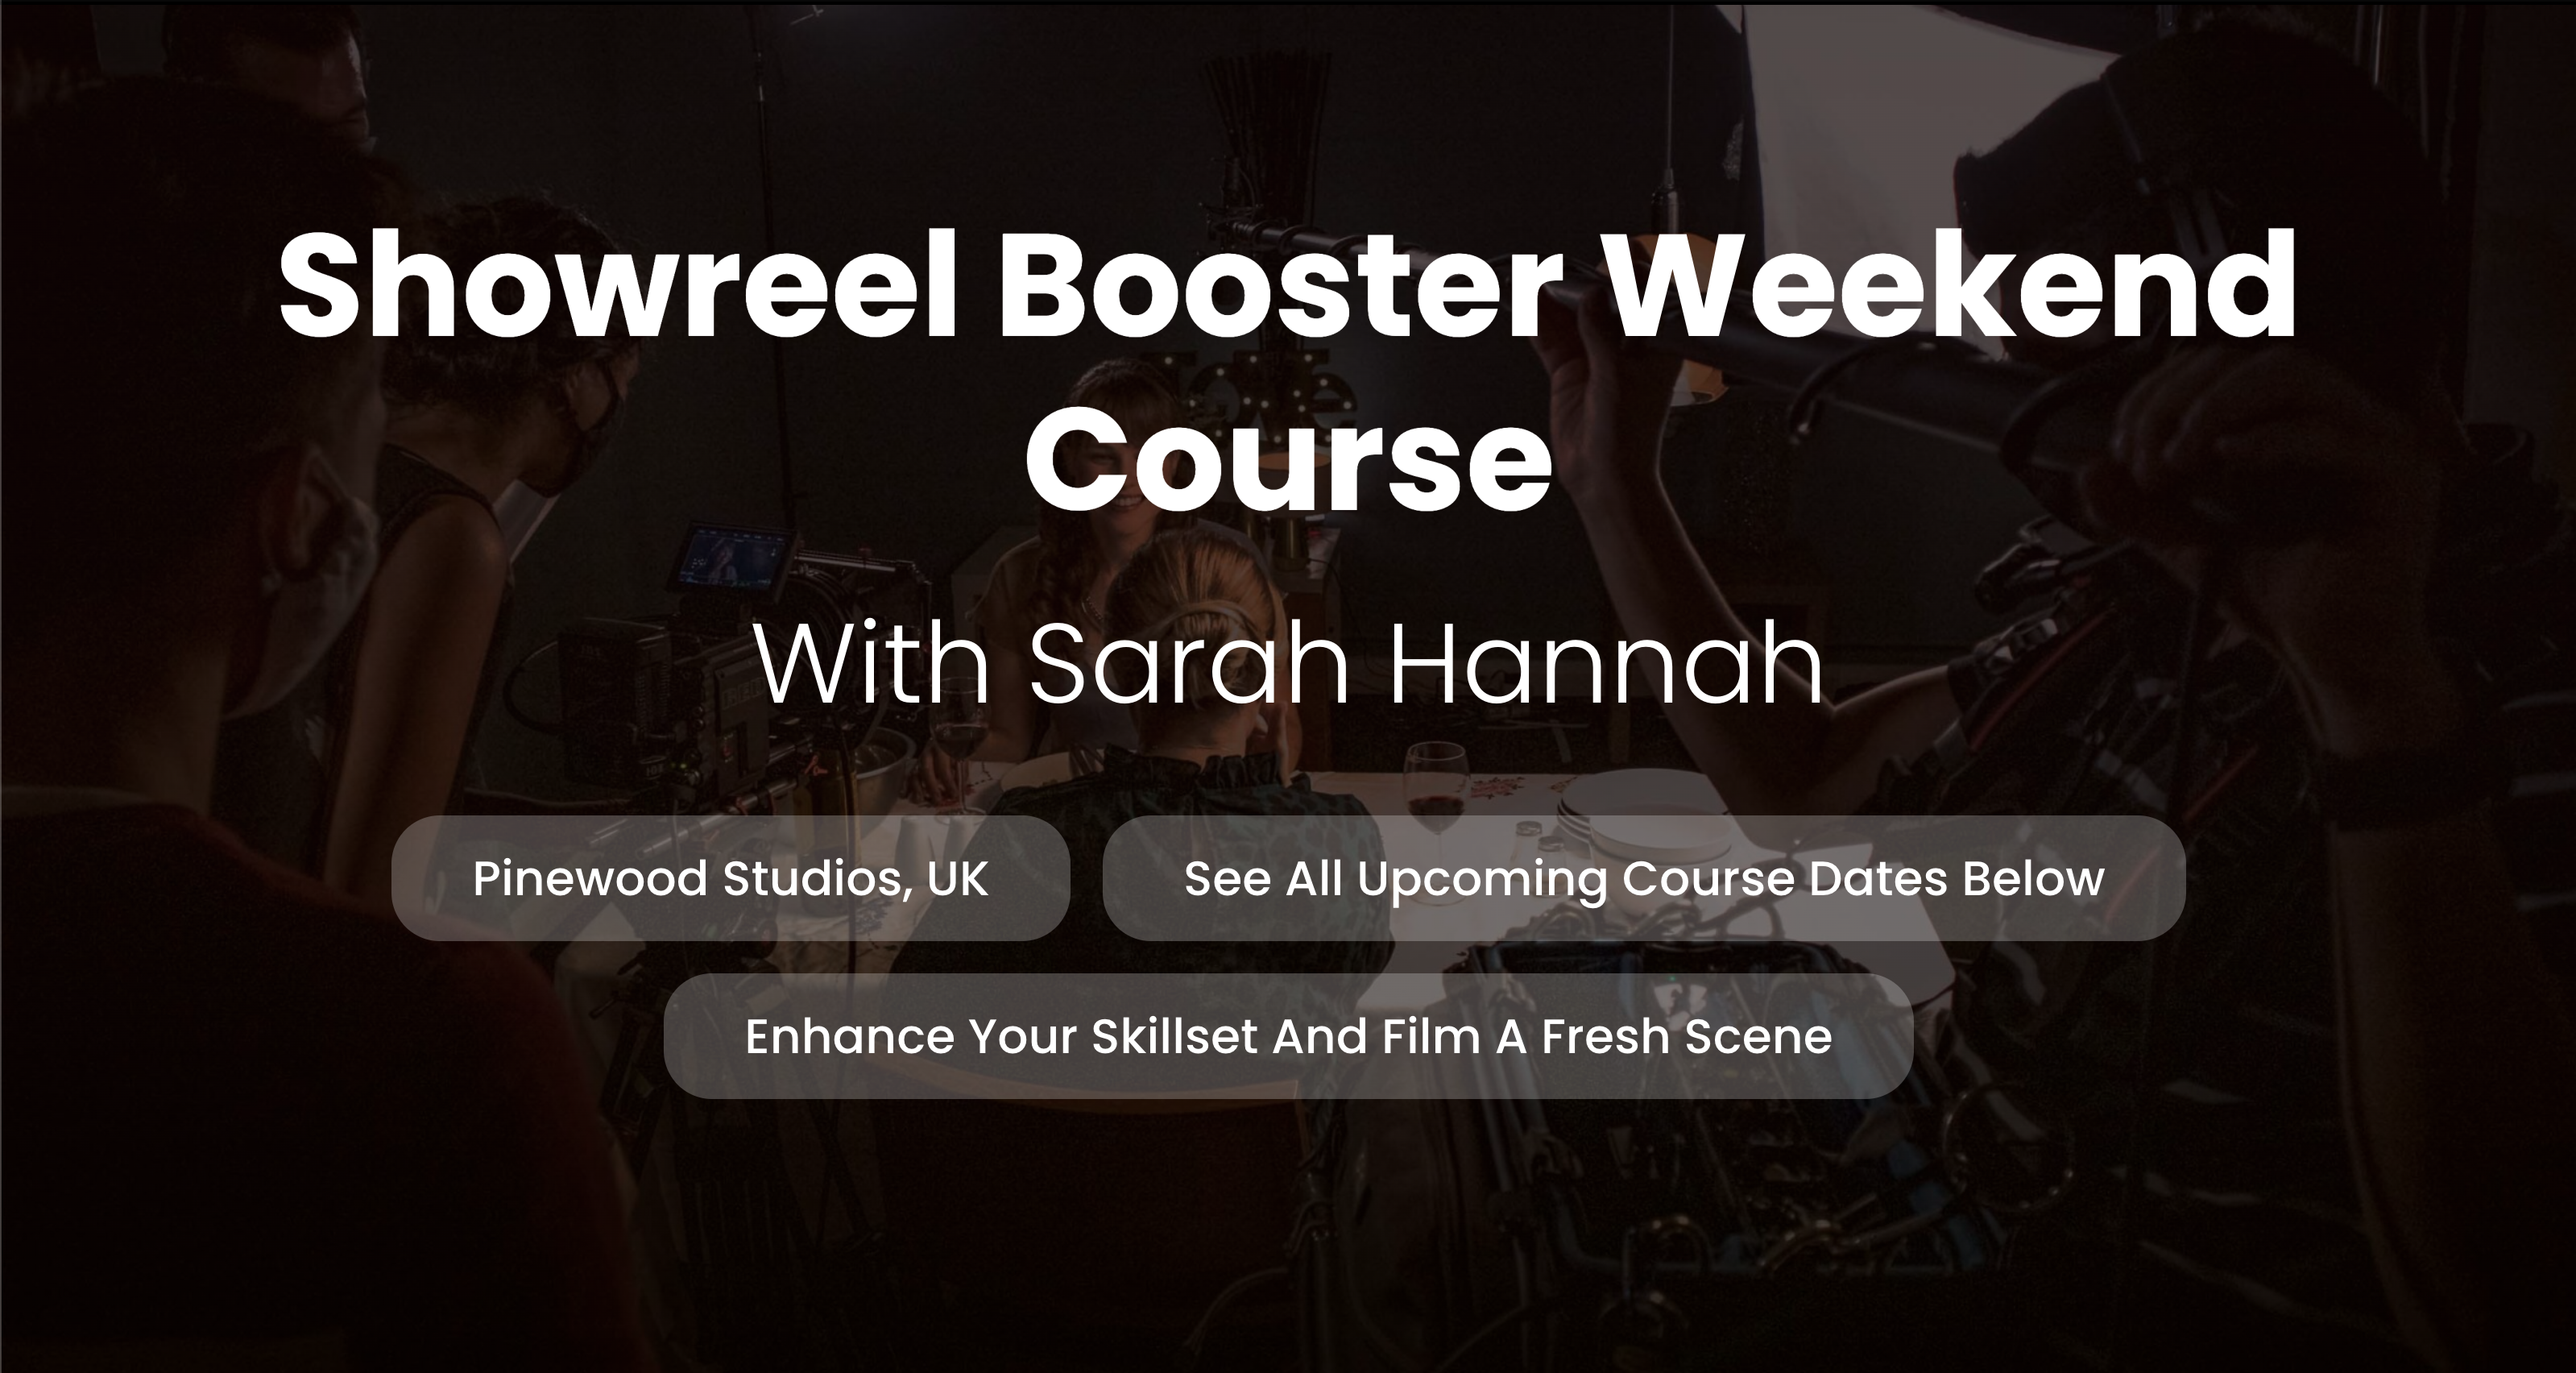 Showreel Booster Weekend Course